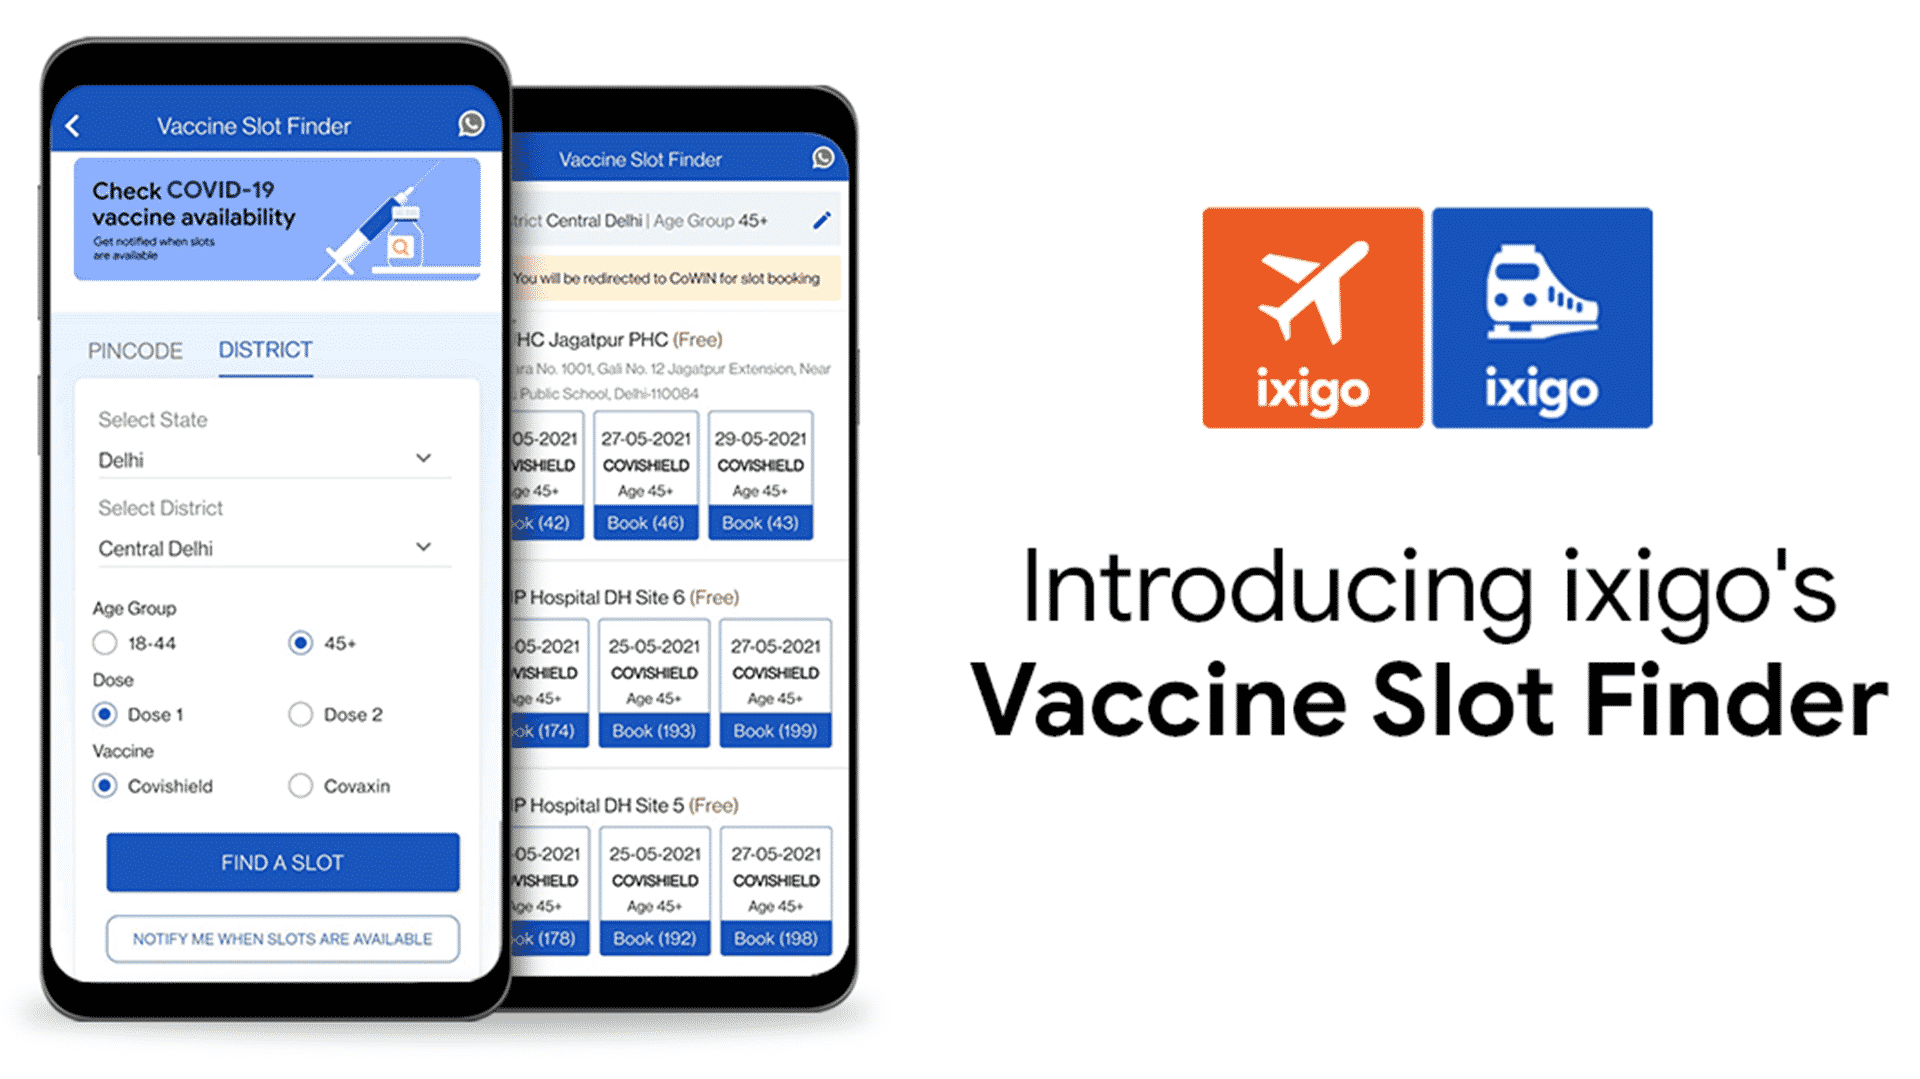 Real Time COVID-19 ‘Vaccine Slot Finder’ launched by ixigo